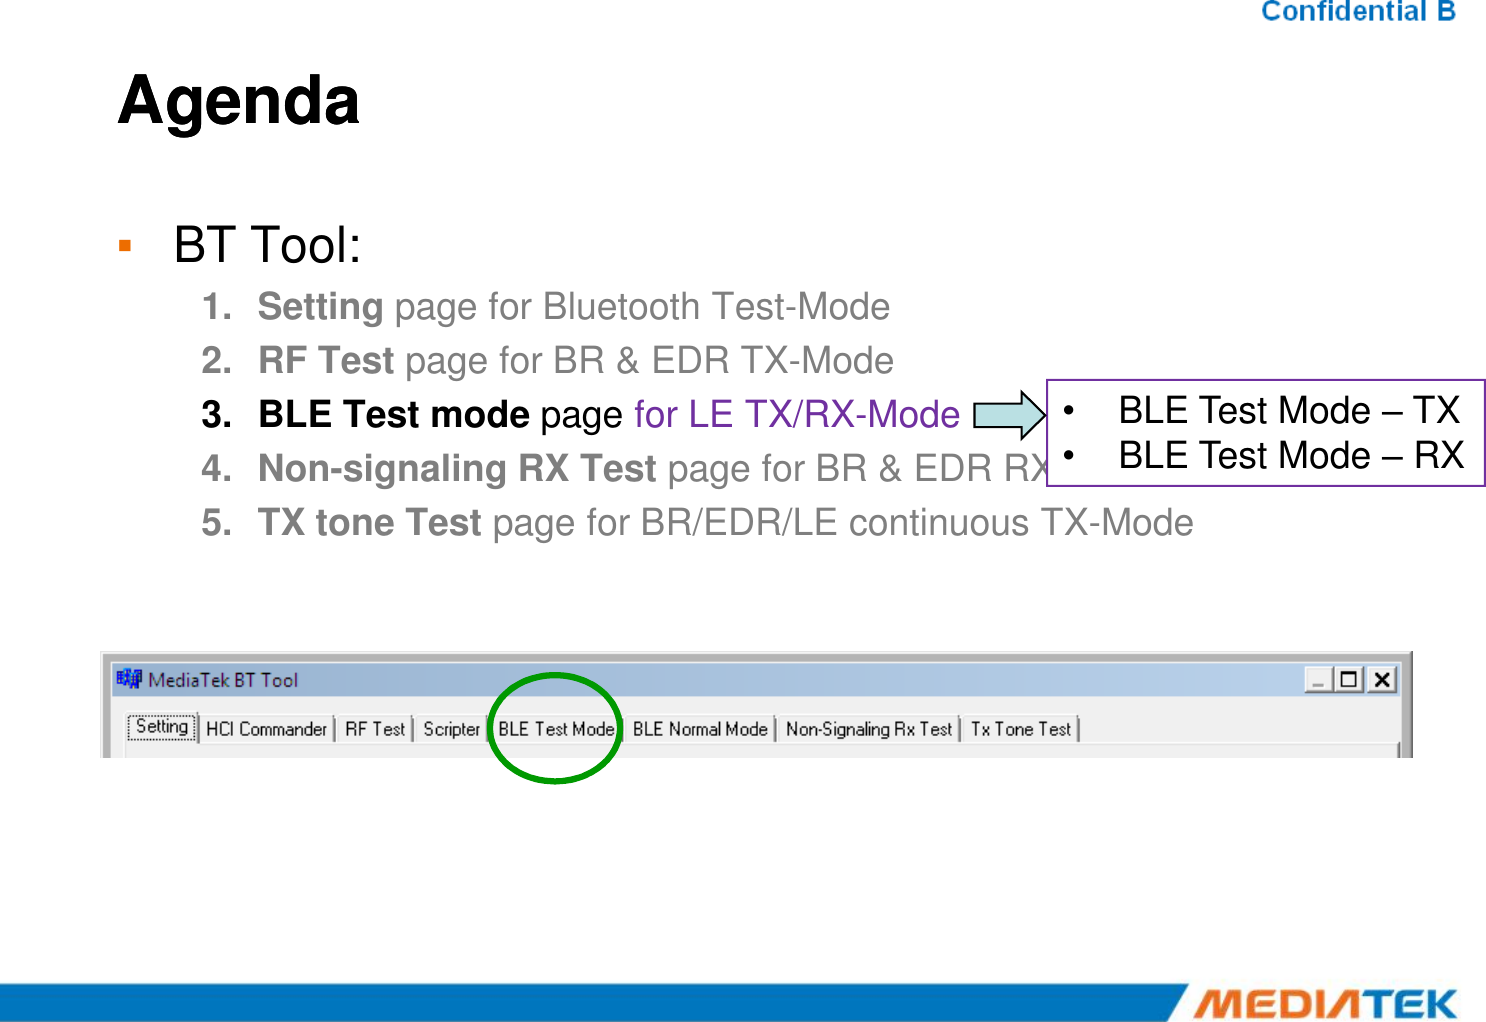 AgendaAgenda▪BT Tool:1.Setting page for Bluetooth Test-Mode 2.RF Test page for BR &amp; EDR TX-Mode 3.BLE Test mode page for LE TX/RX-Mode 4.Non-signaling RX Test page for BR &amp; EDR RX-Mode 5.TX tone Test page for BR/EDR/LE continuous TX-Mode •BLE Test Mode –TX•BLE Test Mode –RX5.TX tone Test page for BR/EDR/LE continuous TX-Mode 